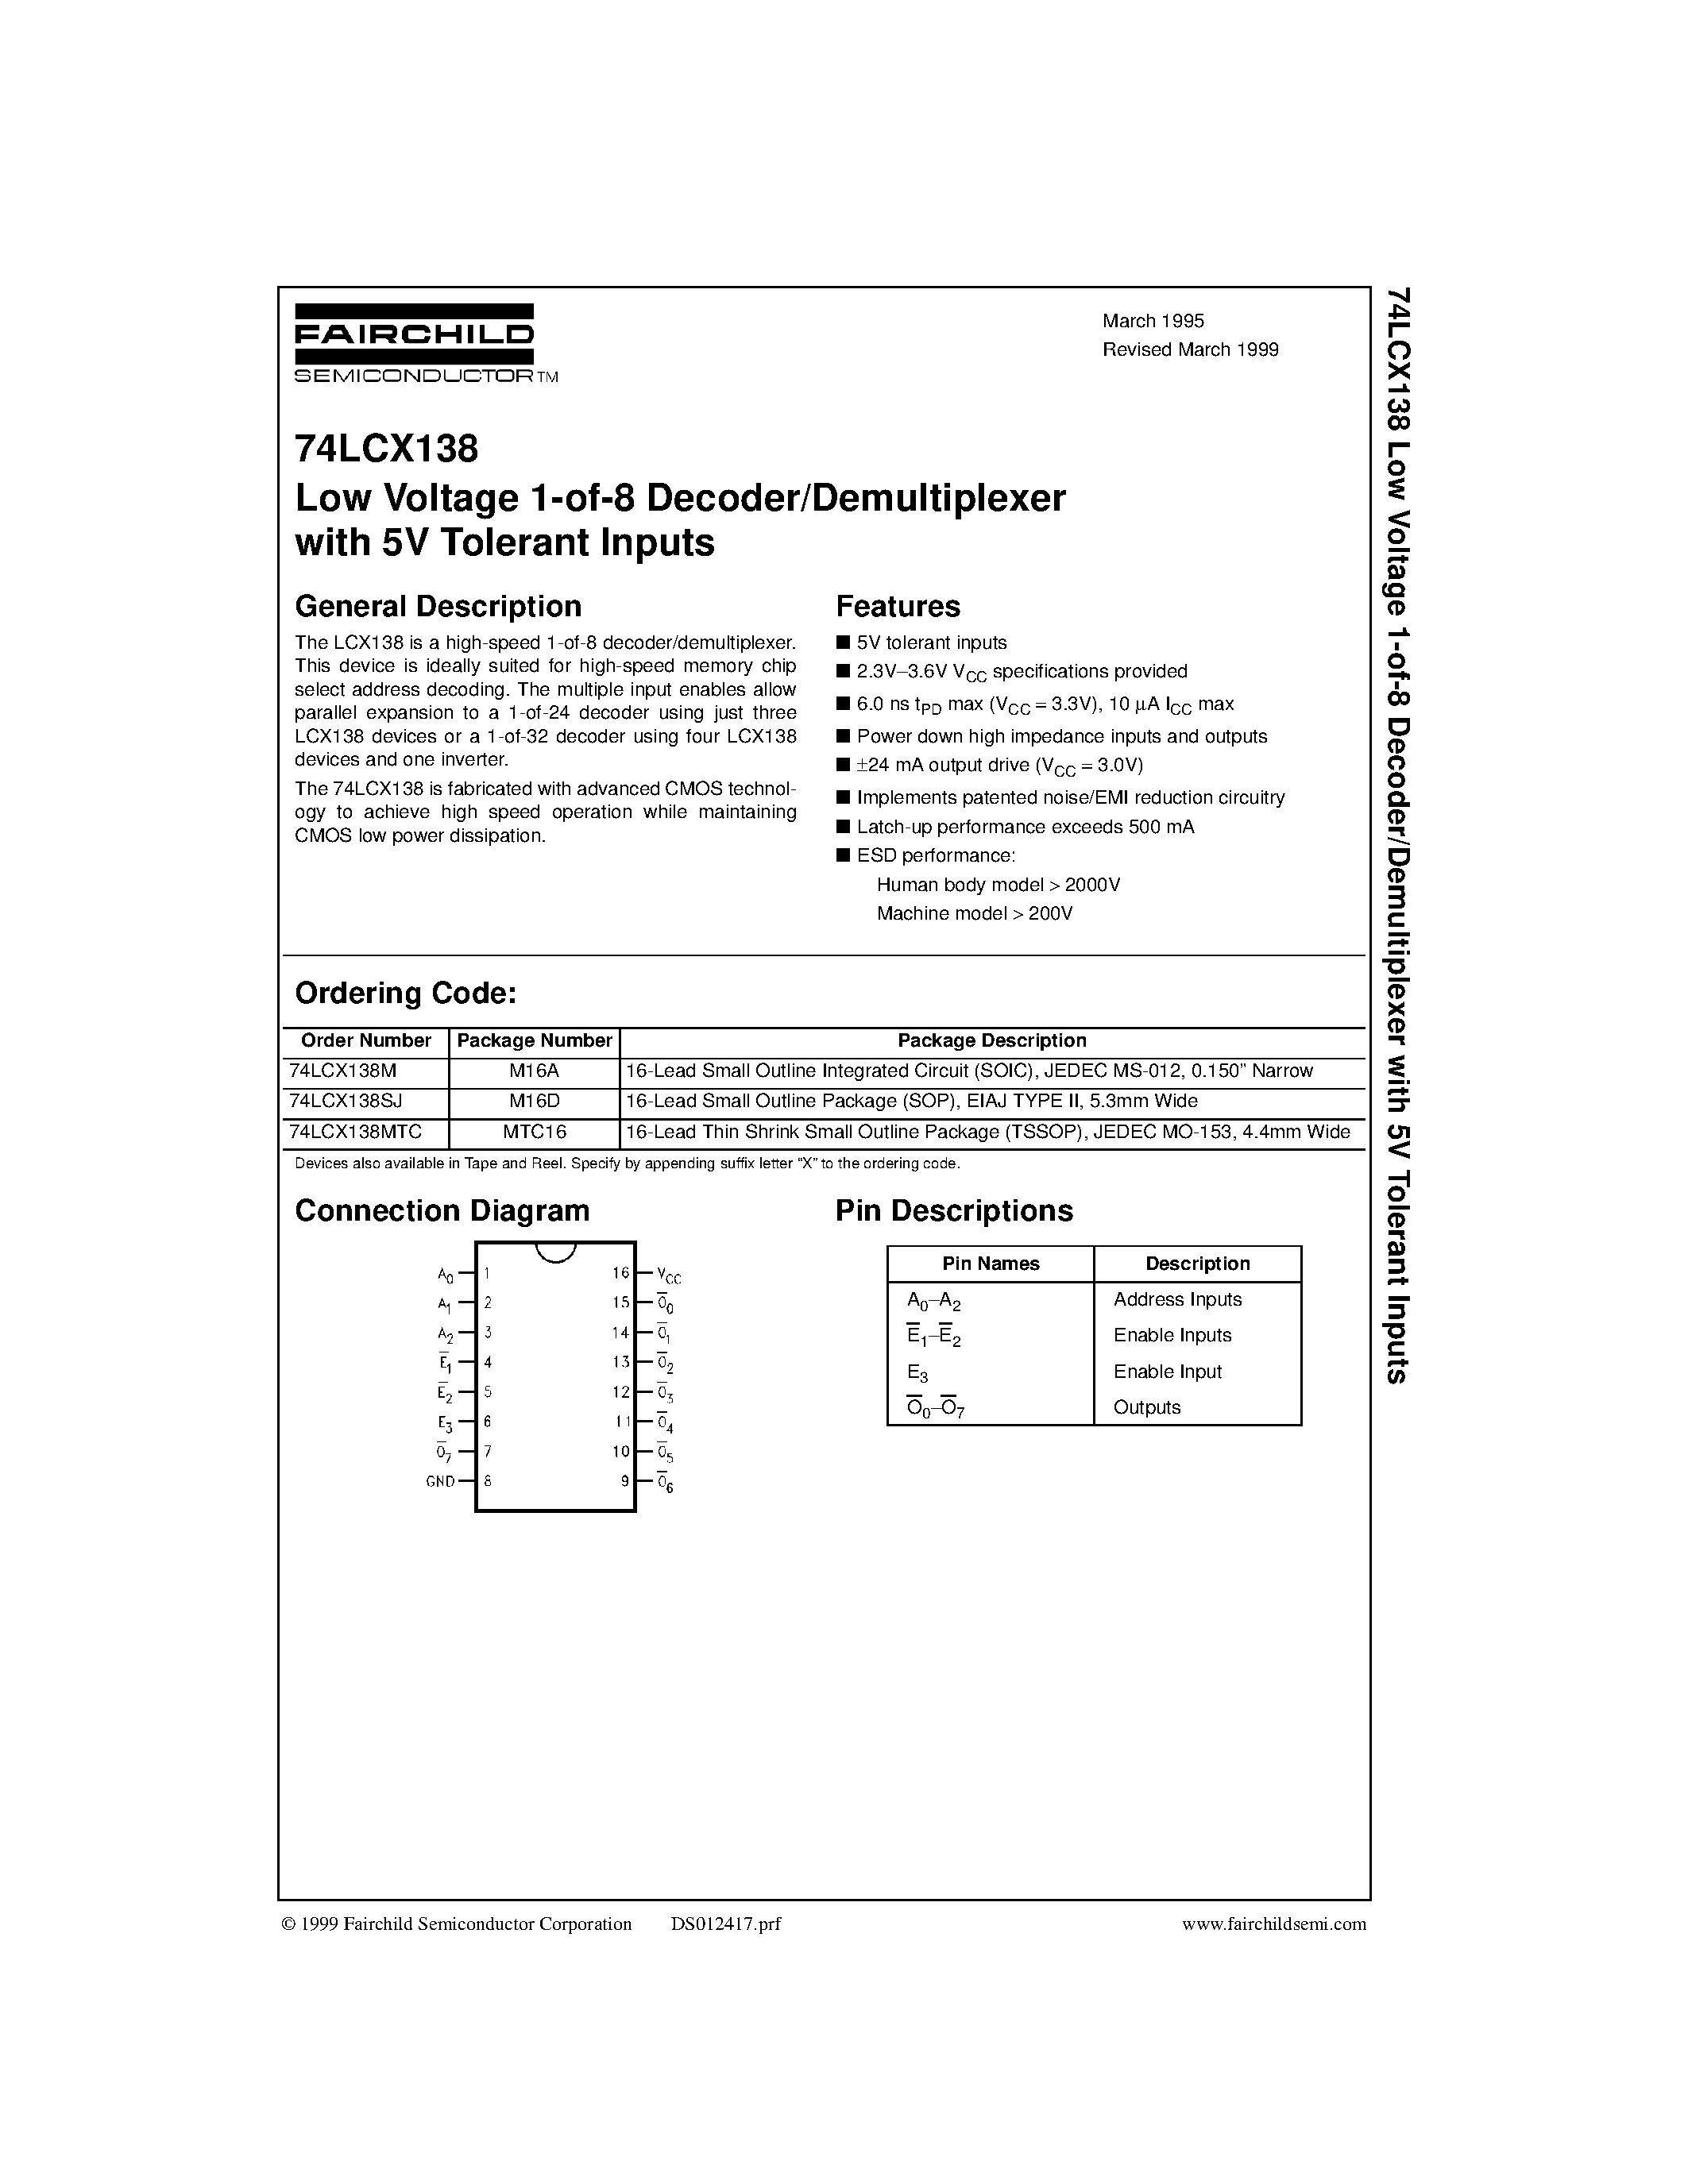 Datasheet 74LCX138MTC - Low Voltage 1-of-8 Decoder/Demultiplexer with 5V Tolerant Inputs page 1